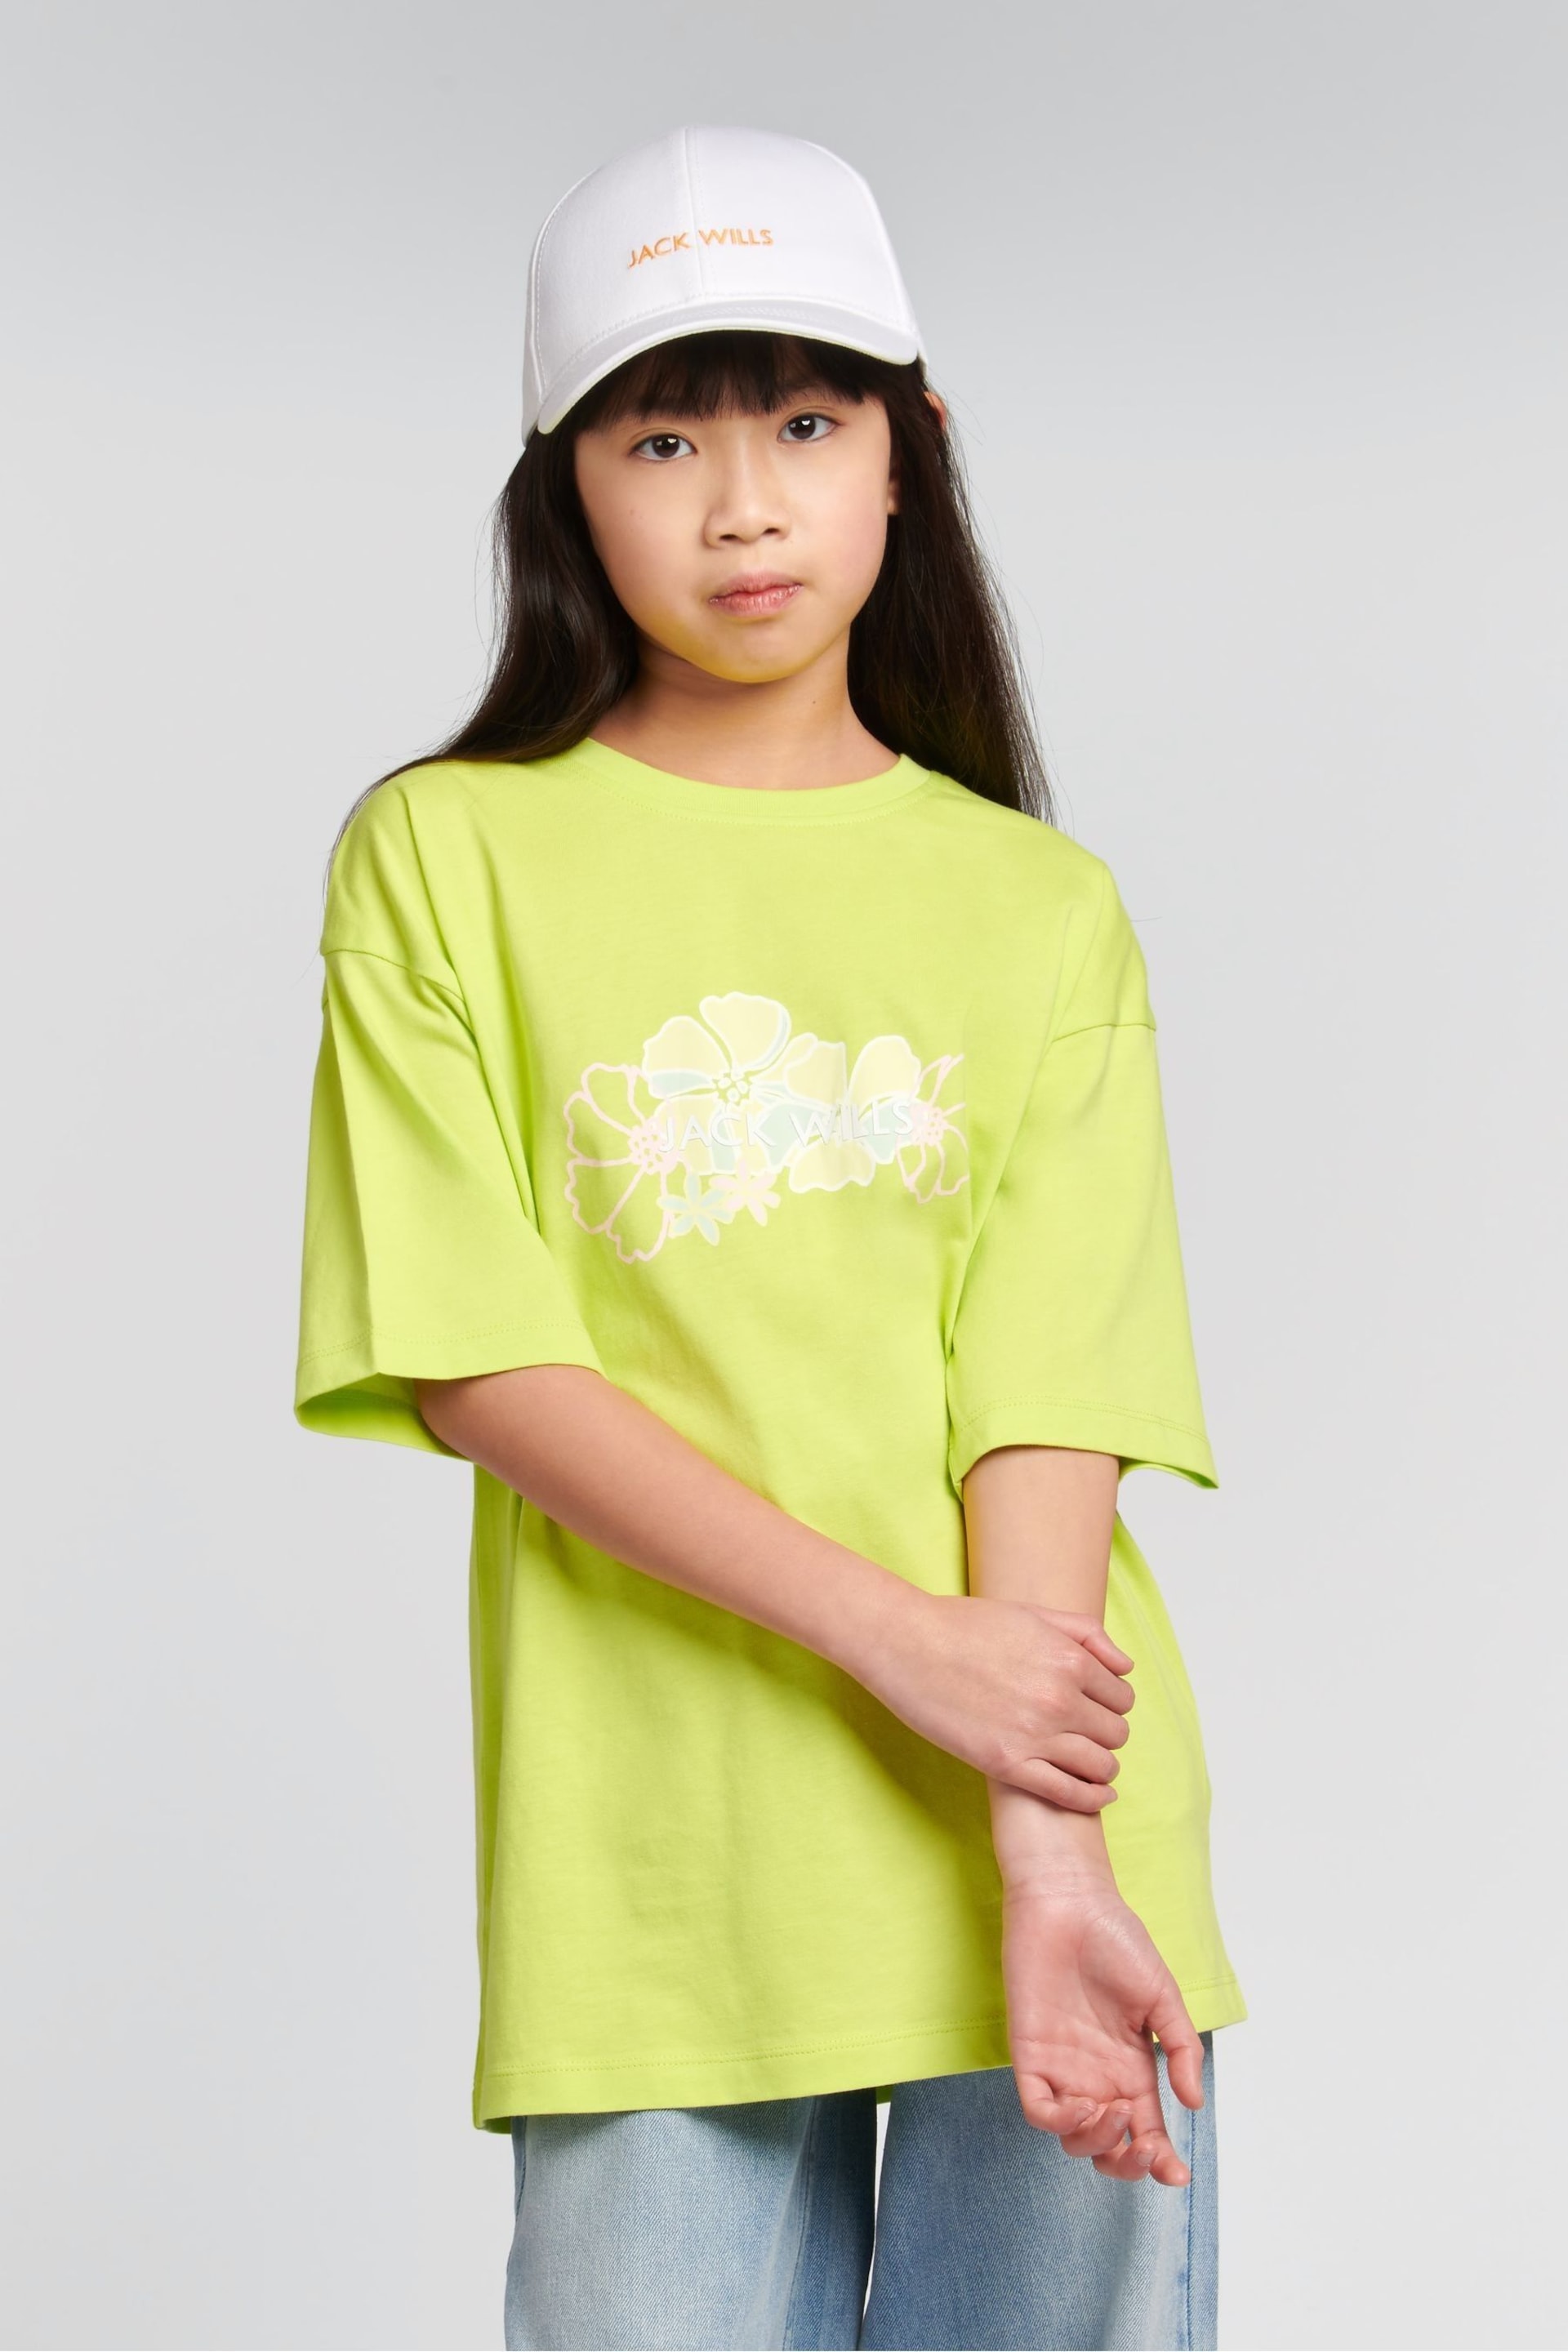 Jack Wills Oversized Fit Girls Green Floral Graphic T-Shirt - Image 1 of 7